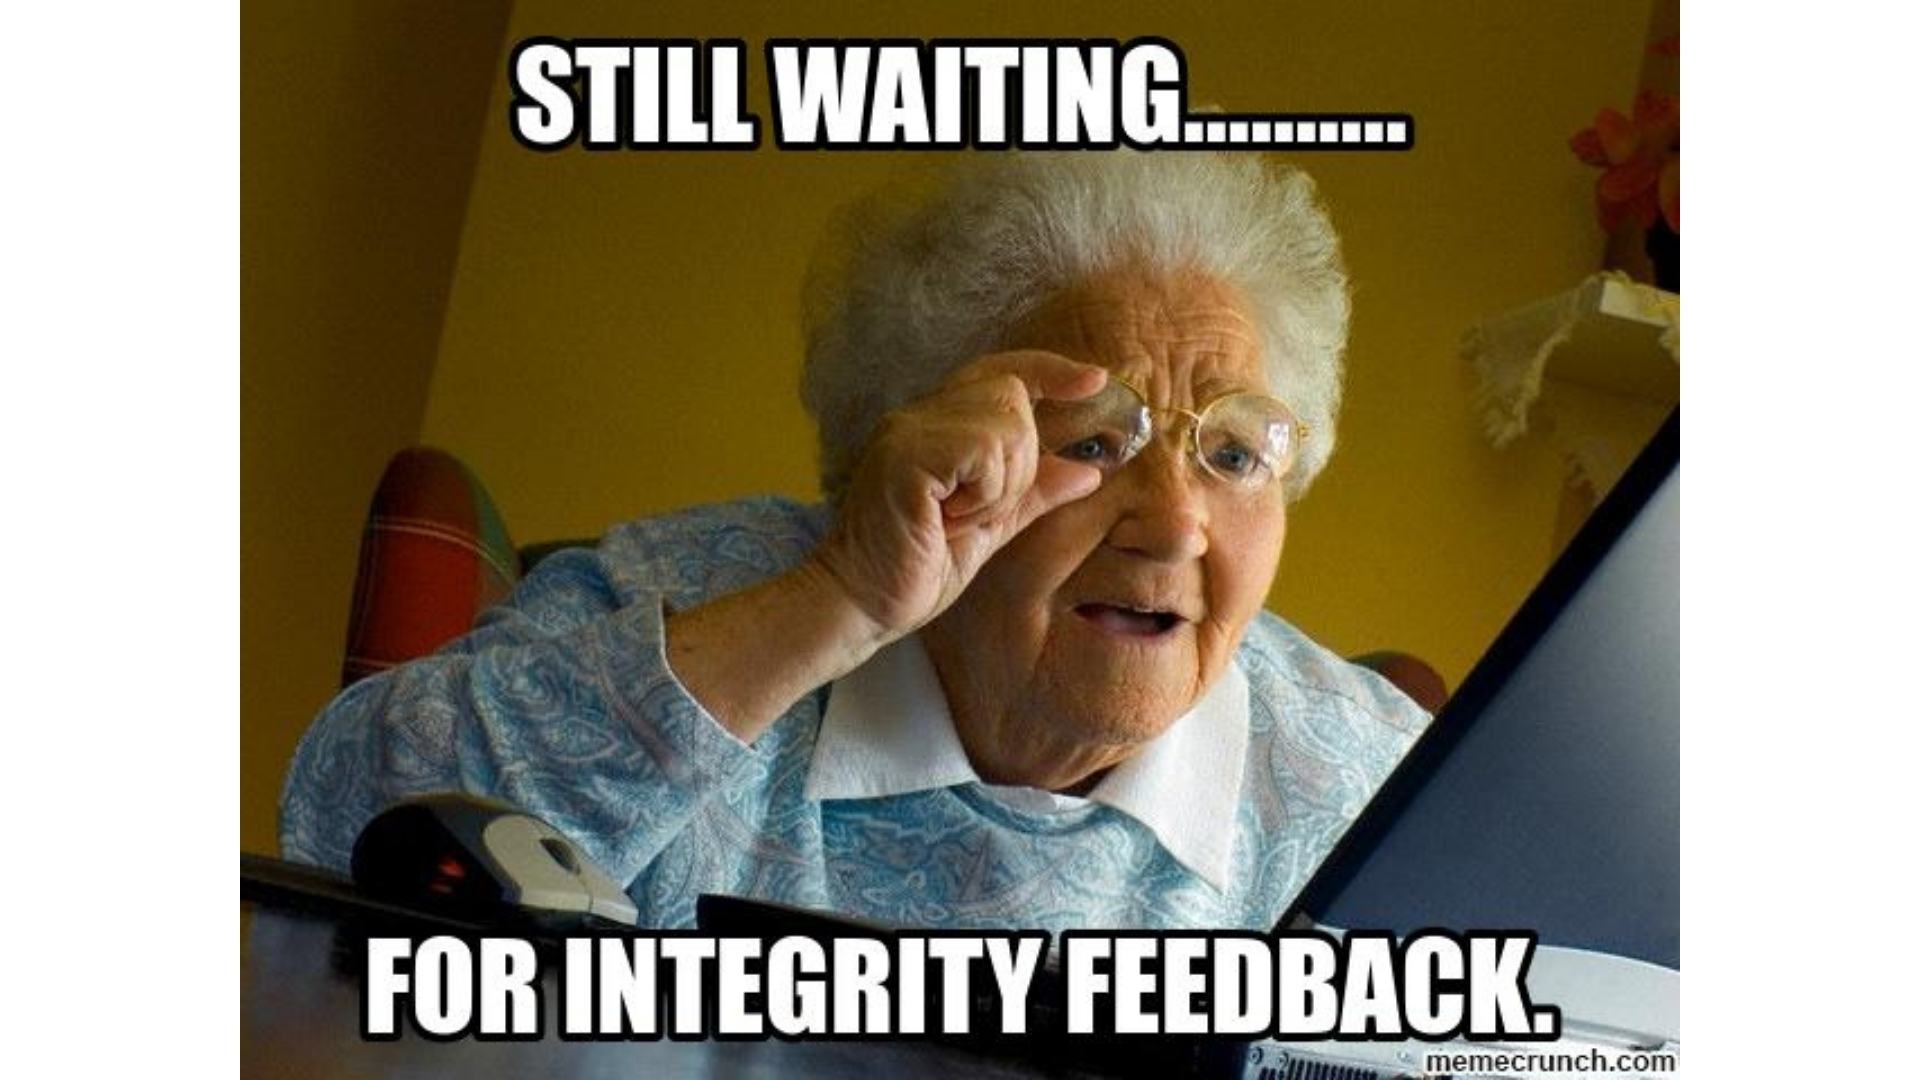 Funny picture about feedback